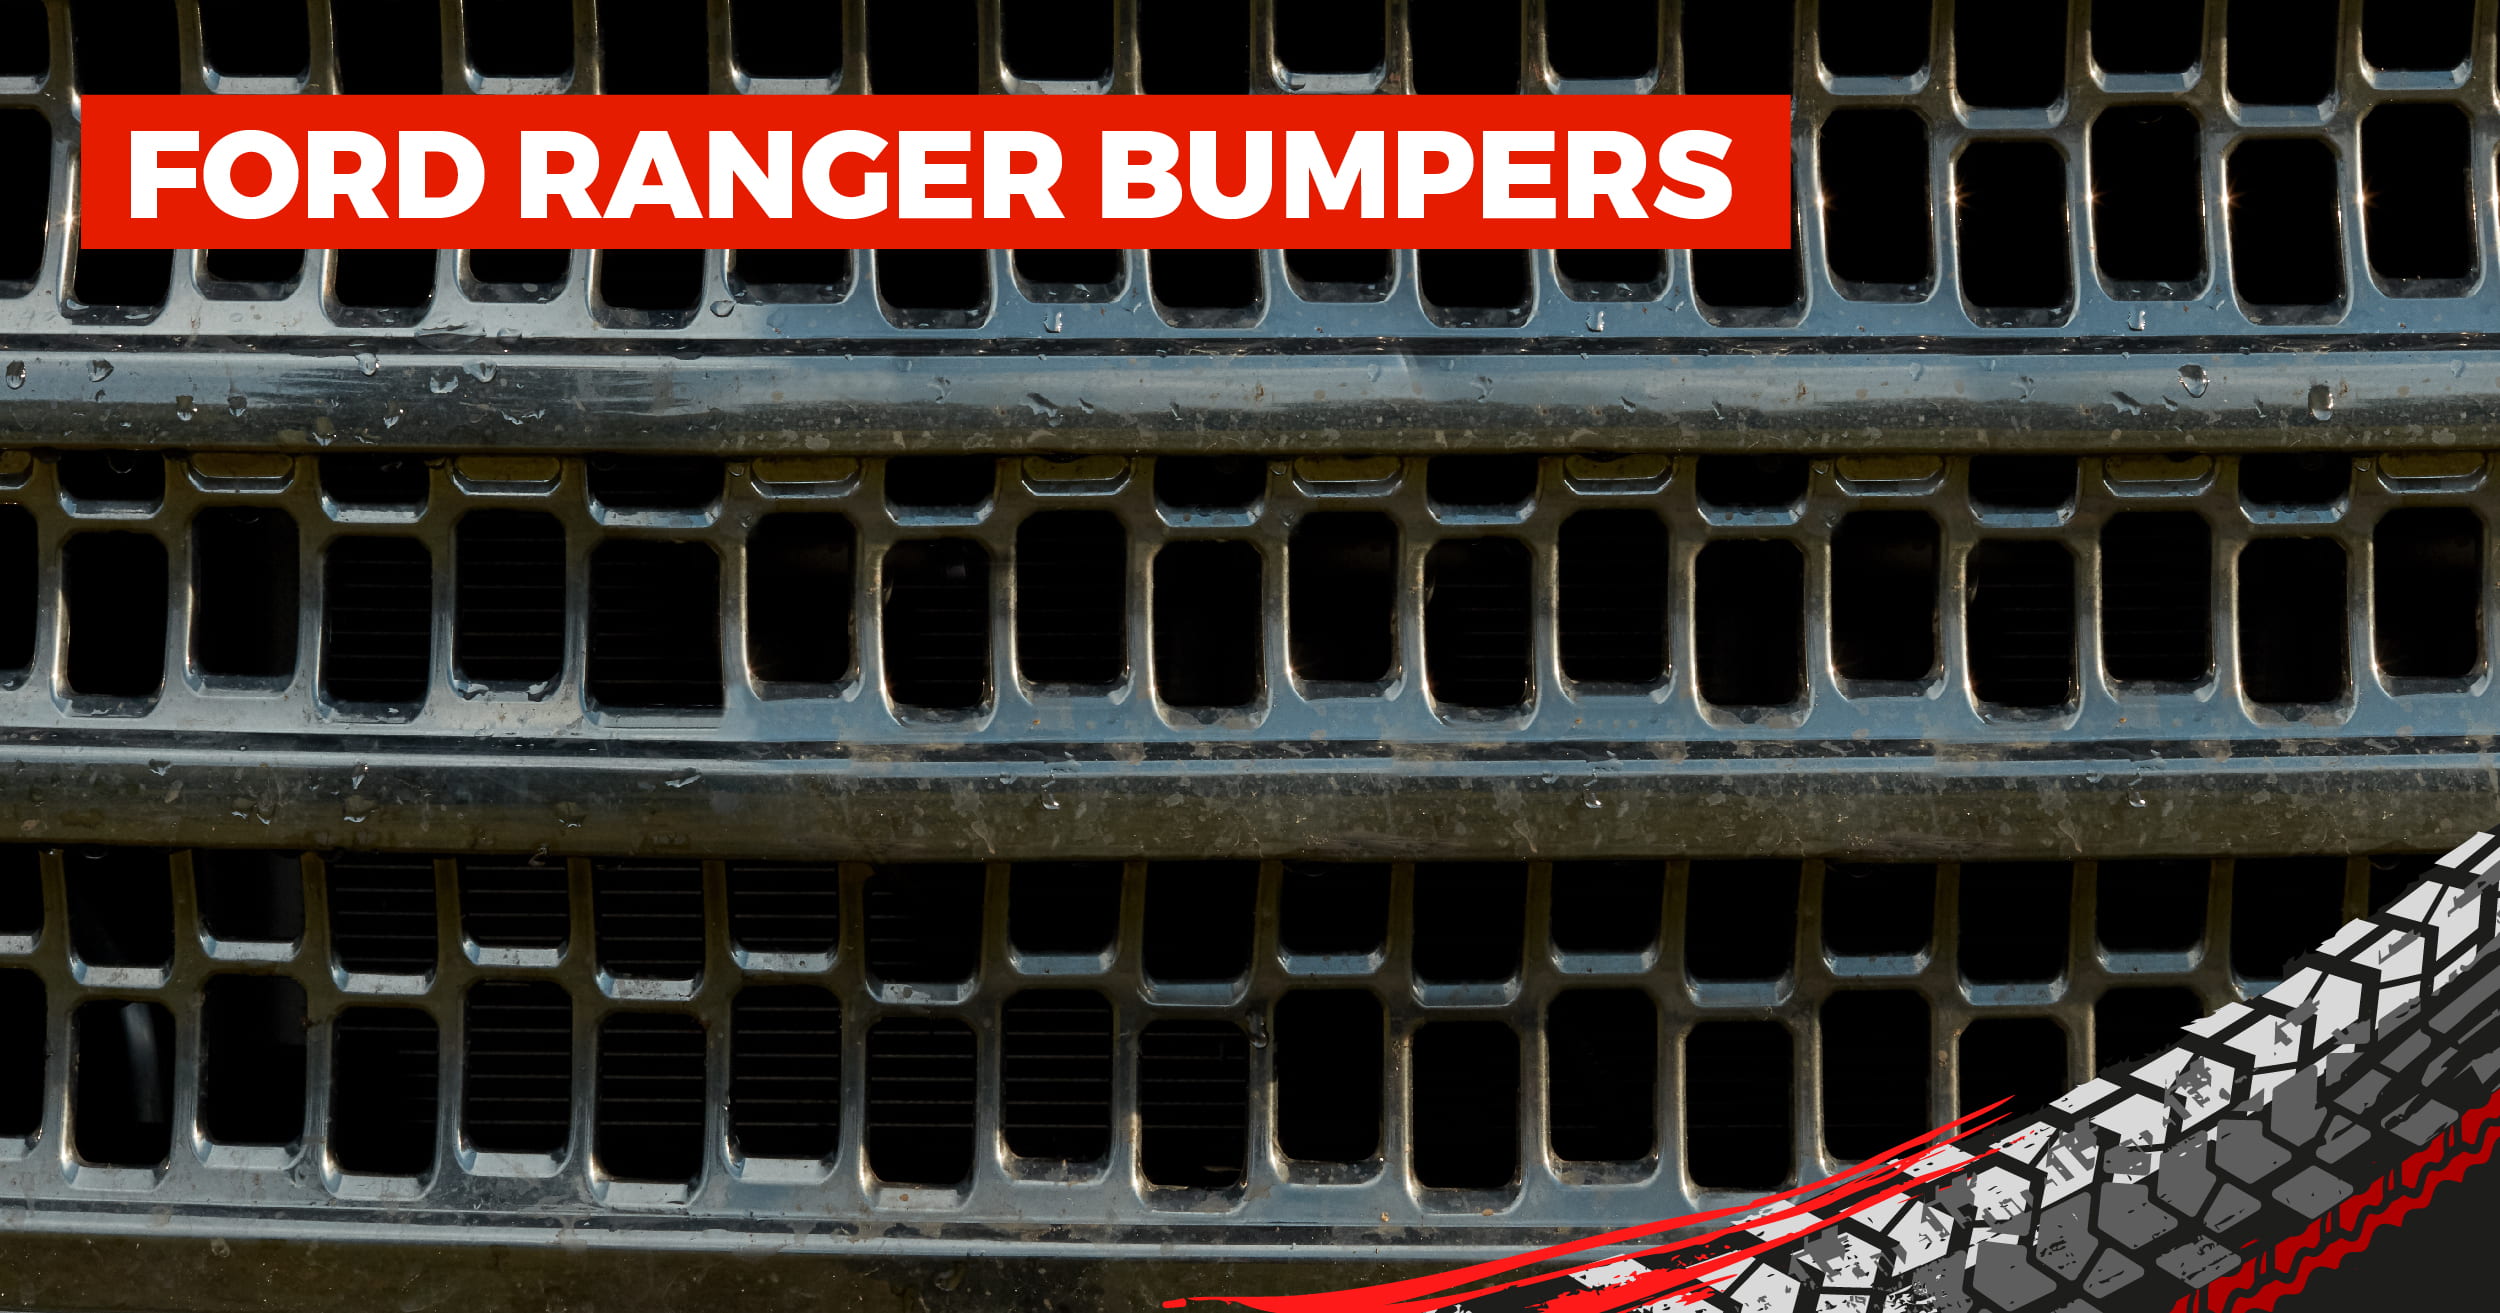 Ford Ranger Bumpers: Everything You Need To Know